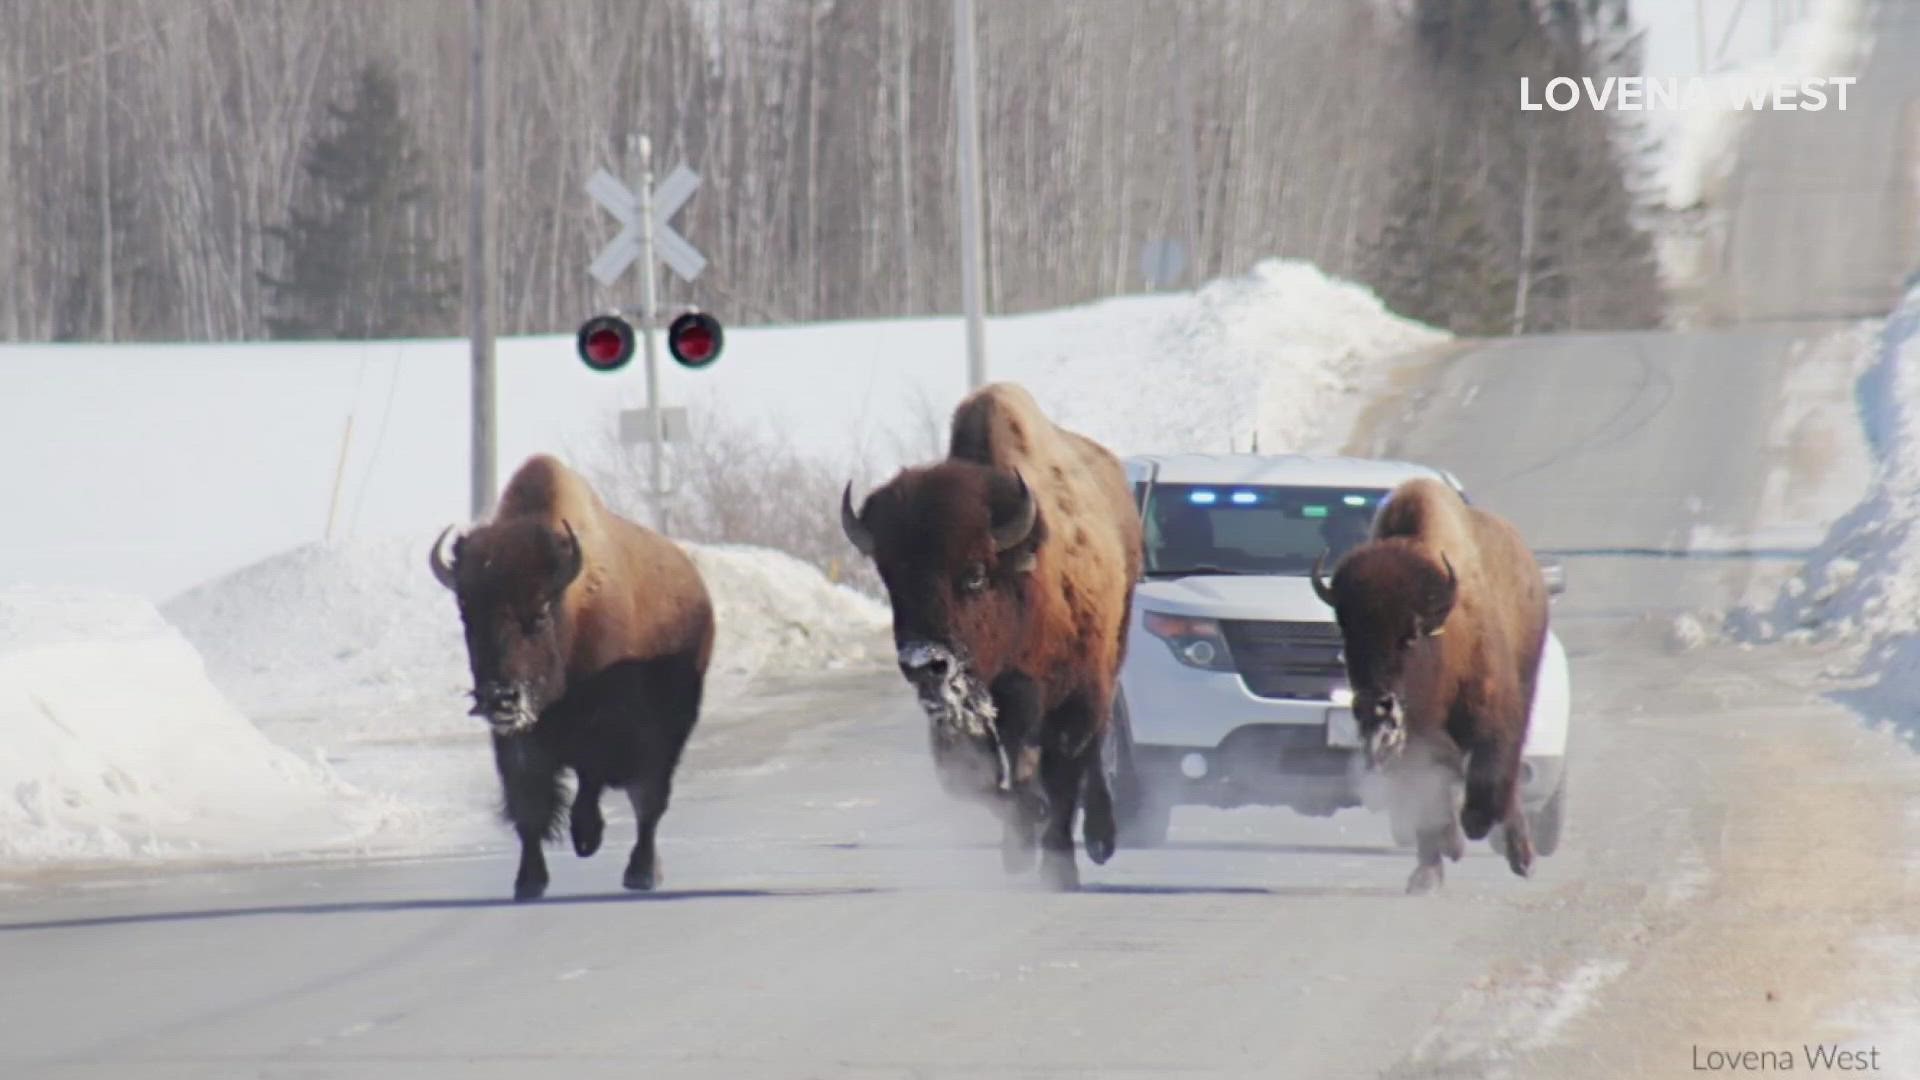 One bison remains unaccounted for, police said.